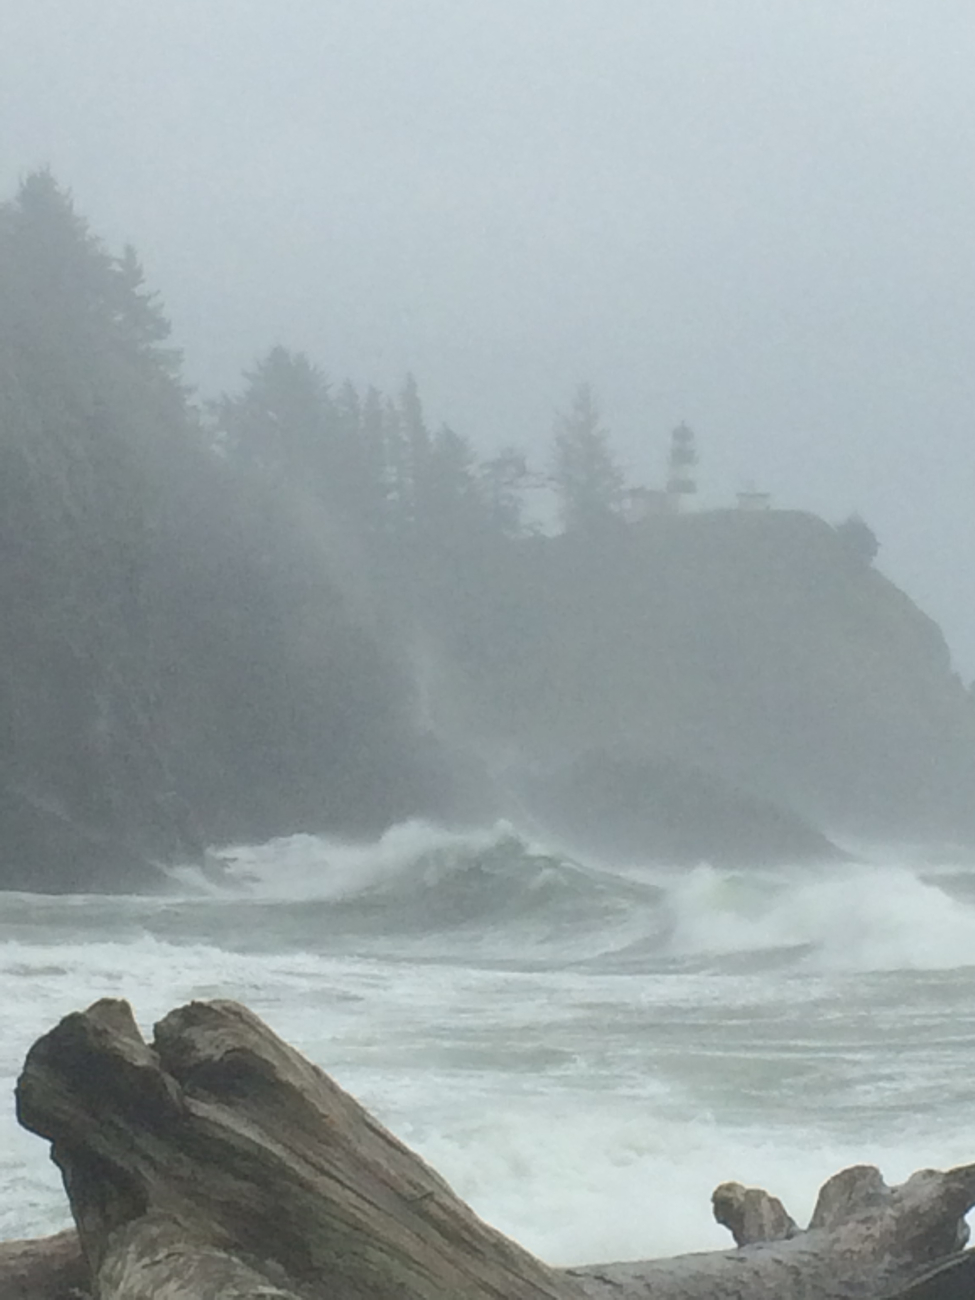 Storm conditions at Cape Disappointment, Ilwaco, WA